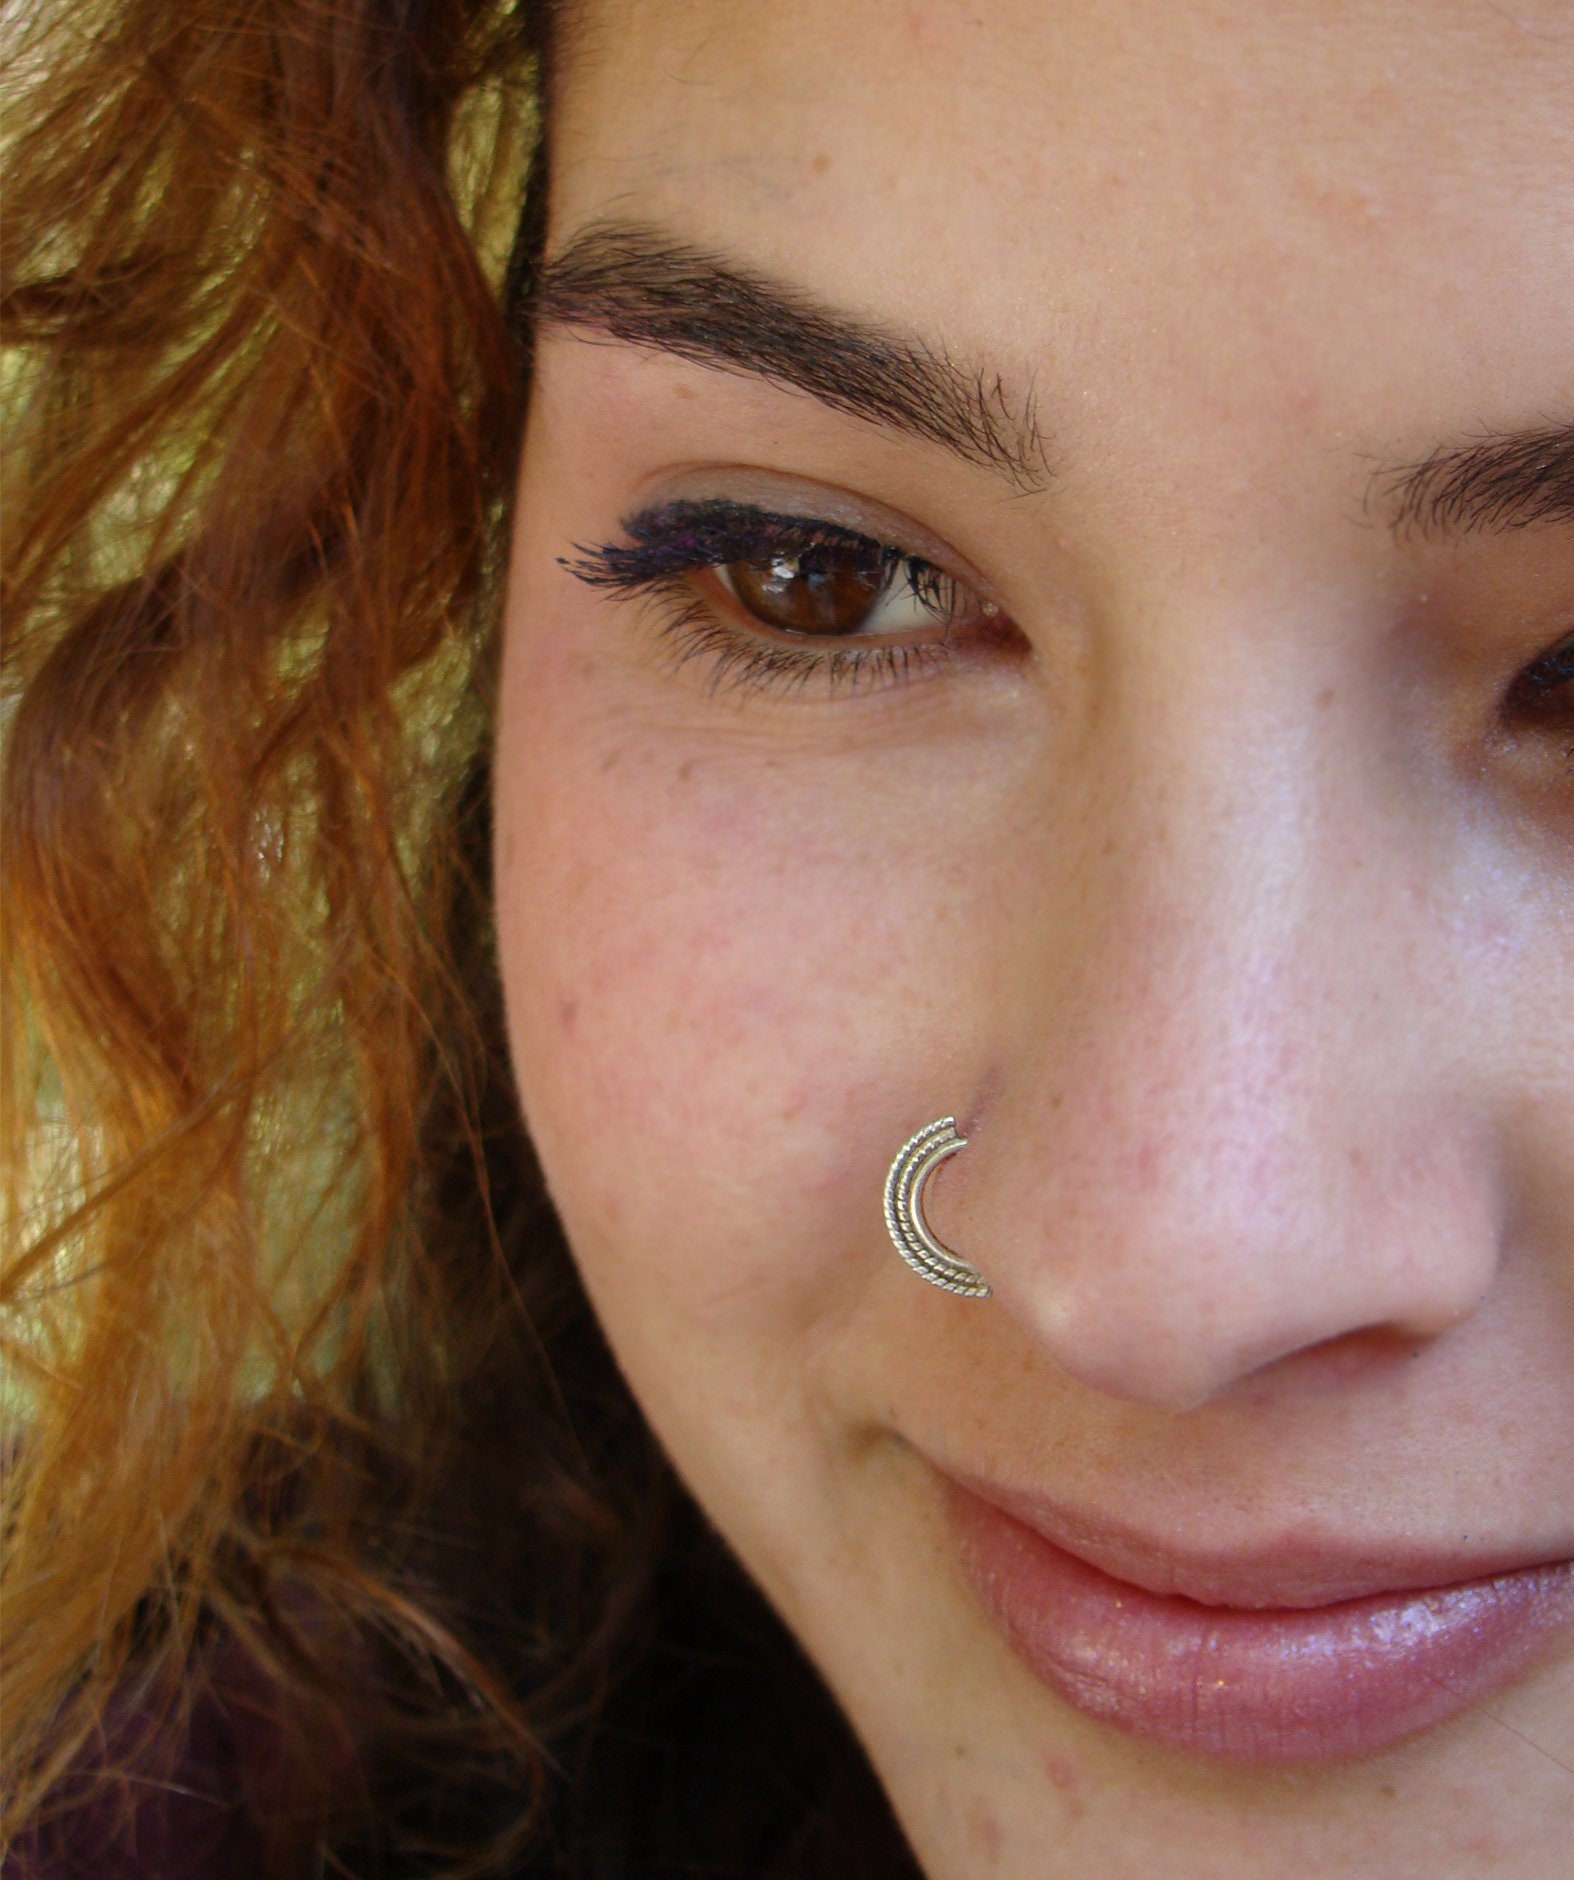 Would a nose piercing look good on a long nose? - Quora